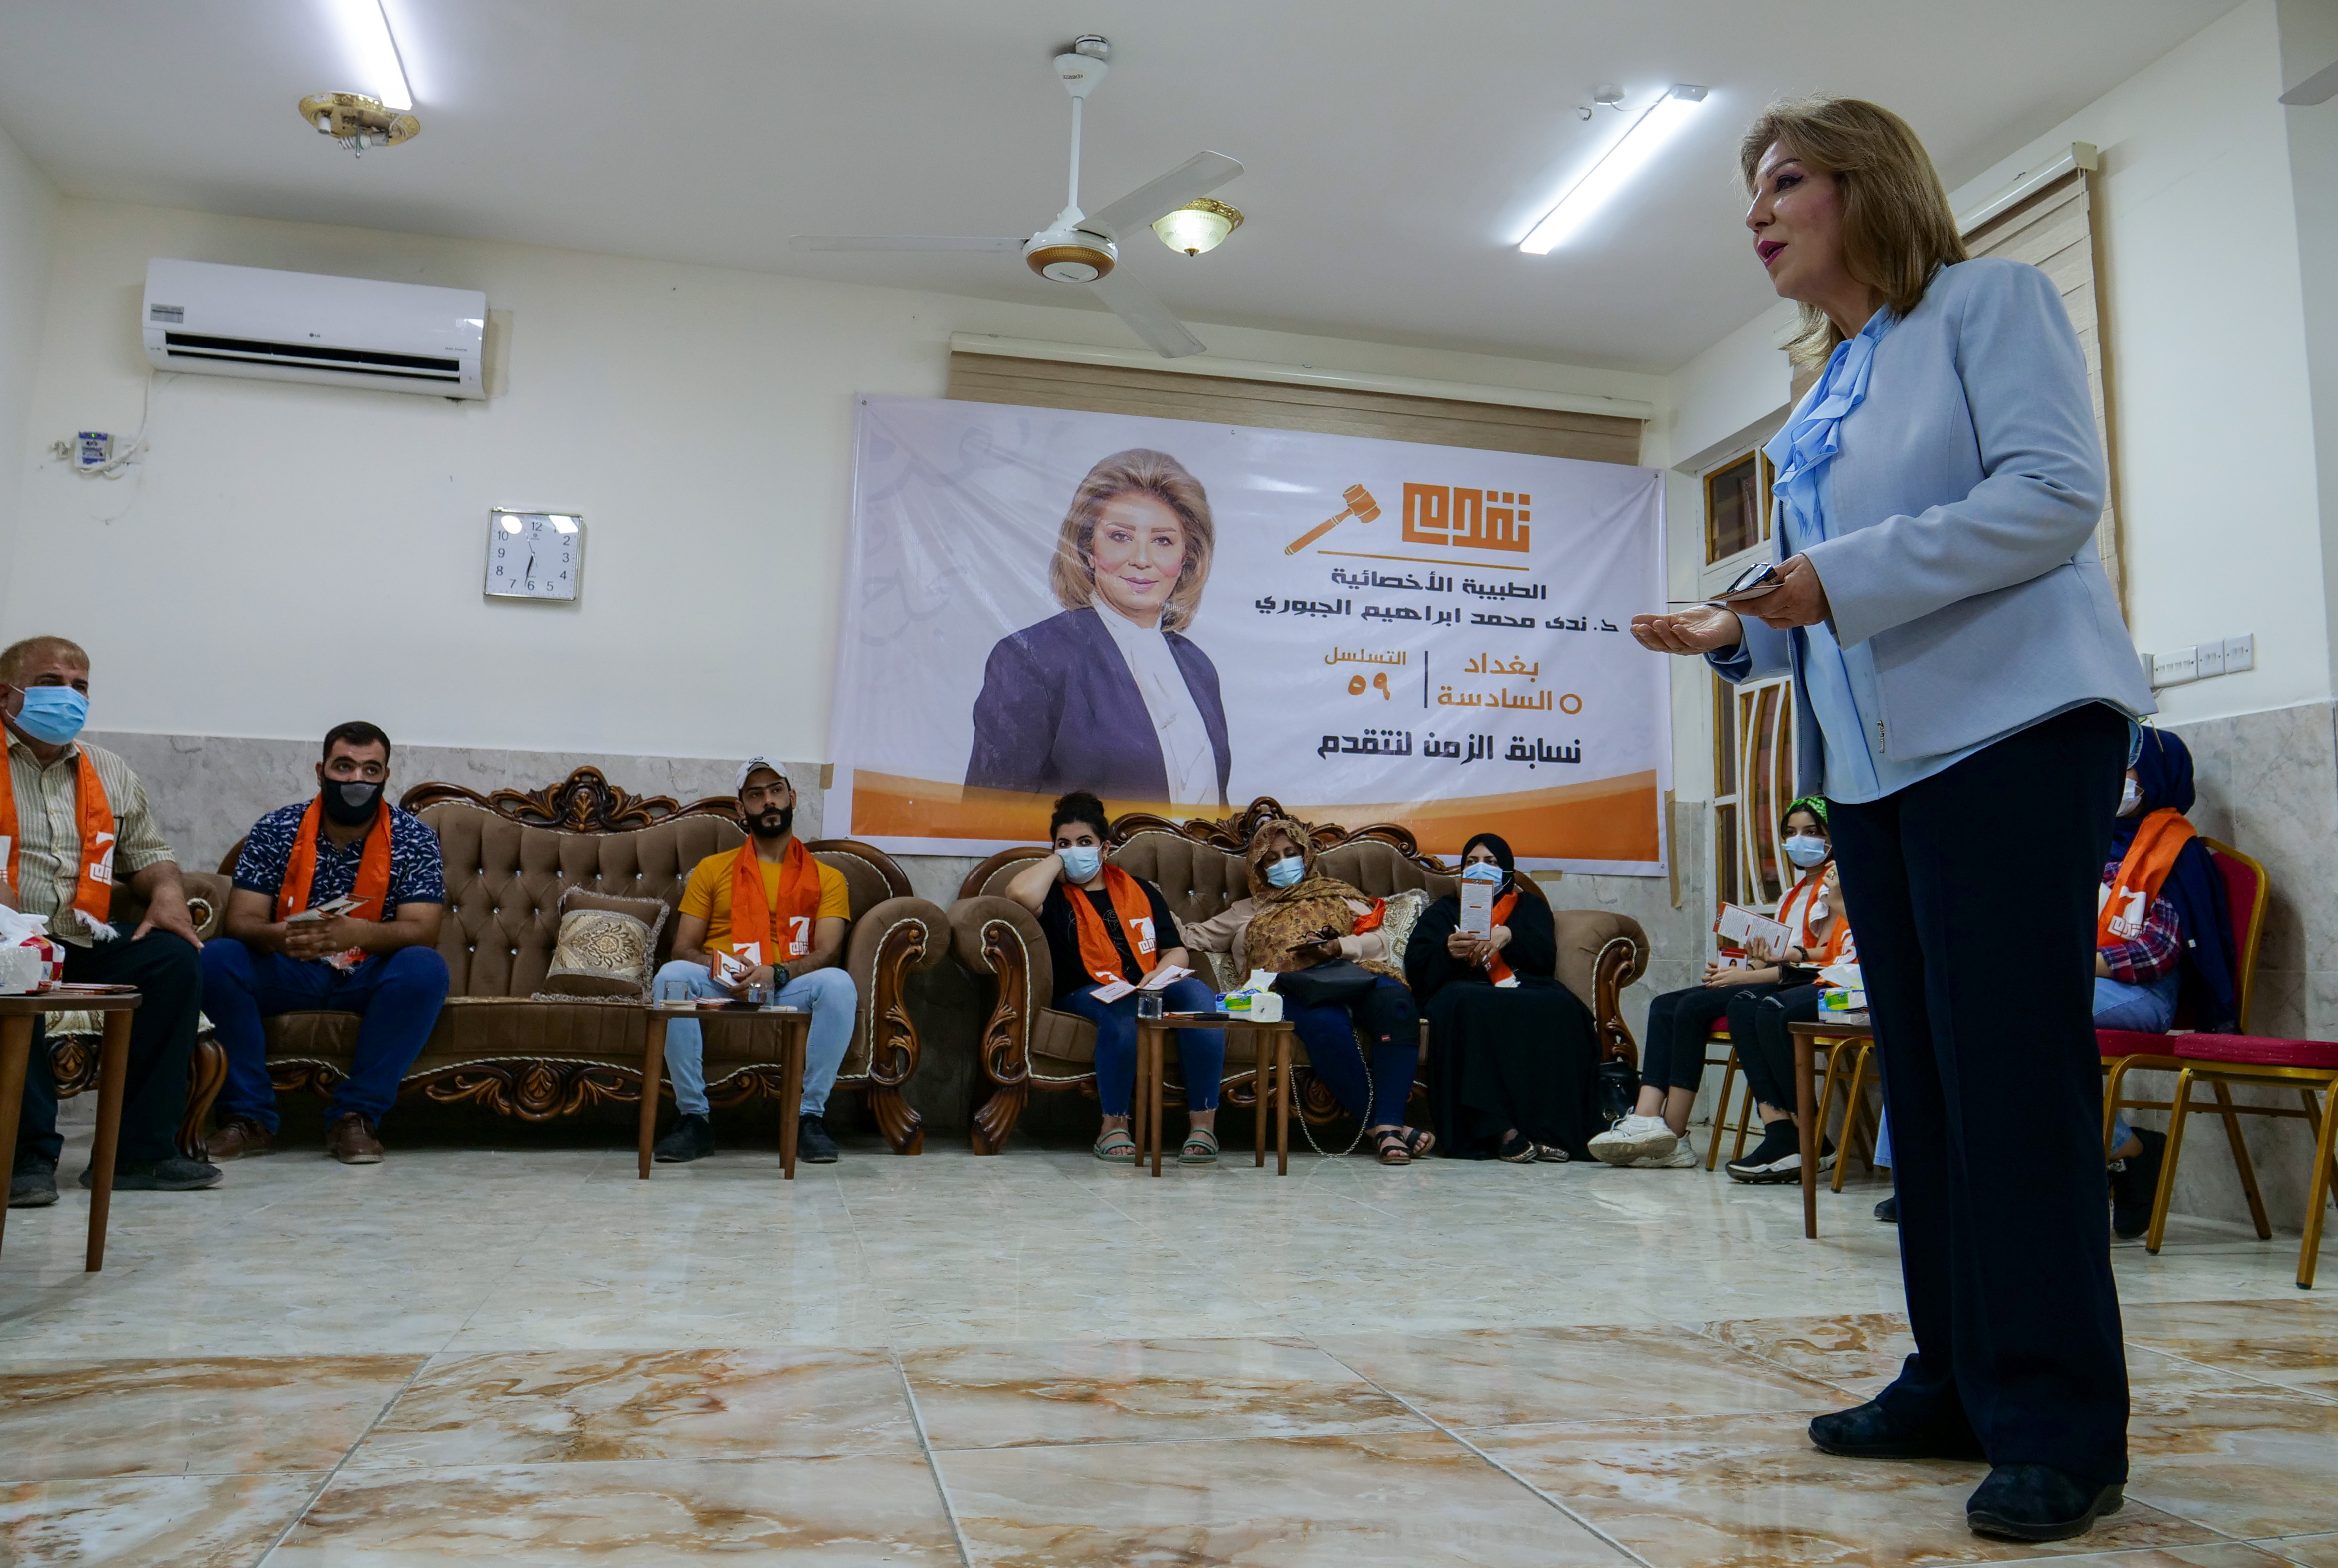 Nada al-Jubori, a candidate in Iraq's upcoming parliamentary elections, speaks to her supporters in Baghdad